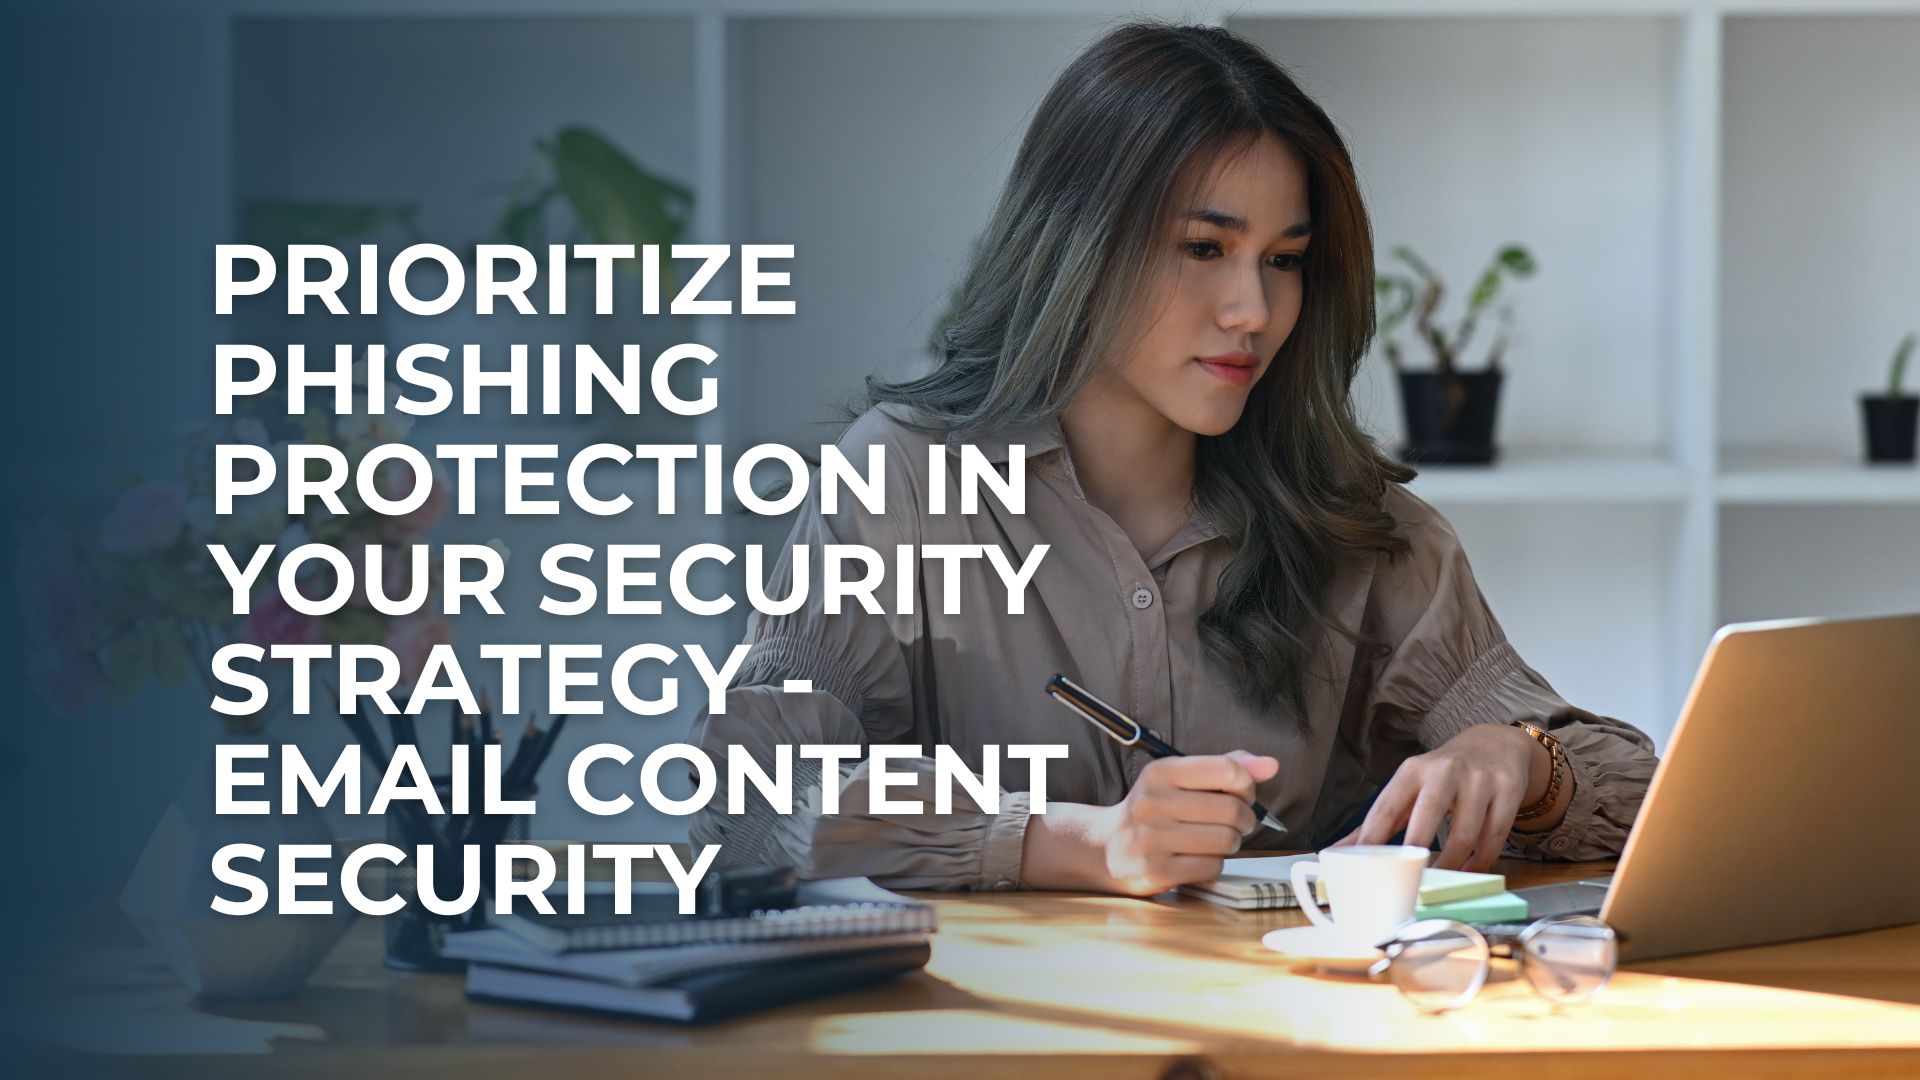 Prioritize Phishing Protection and Email Content Security in Your Security Strategy